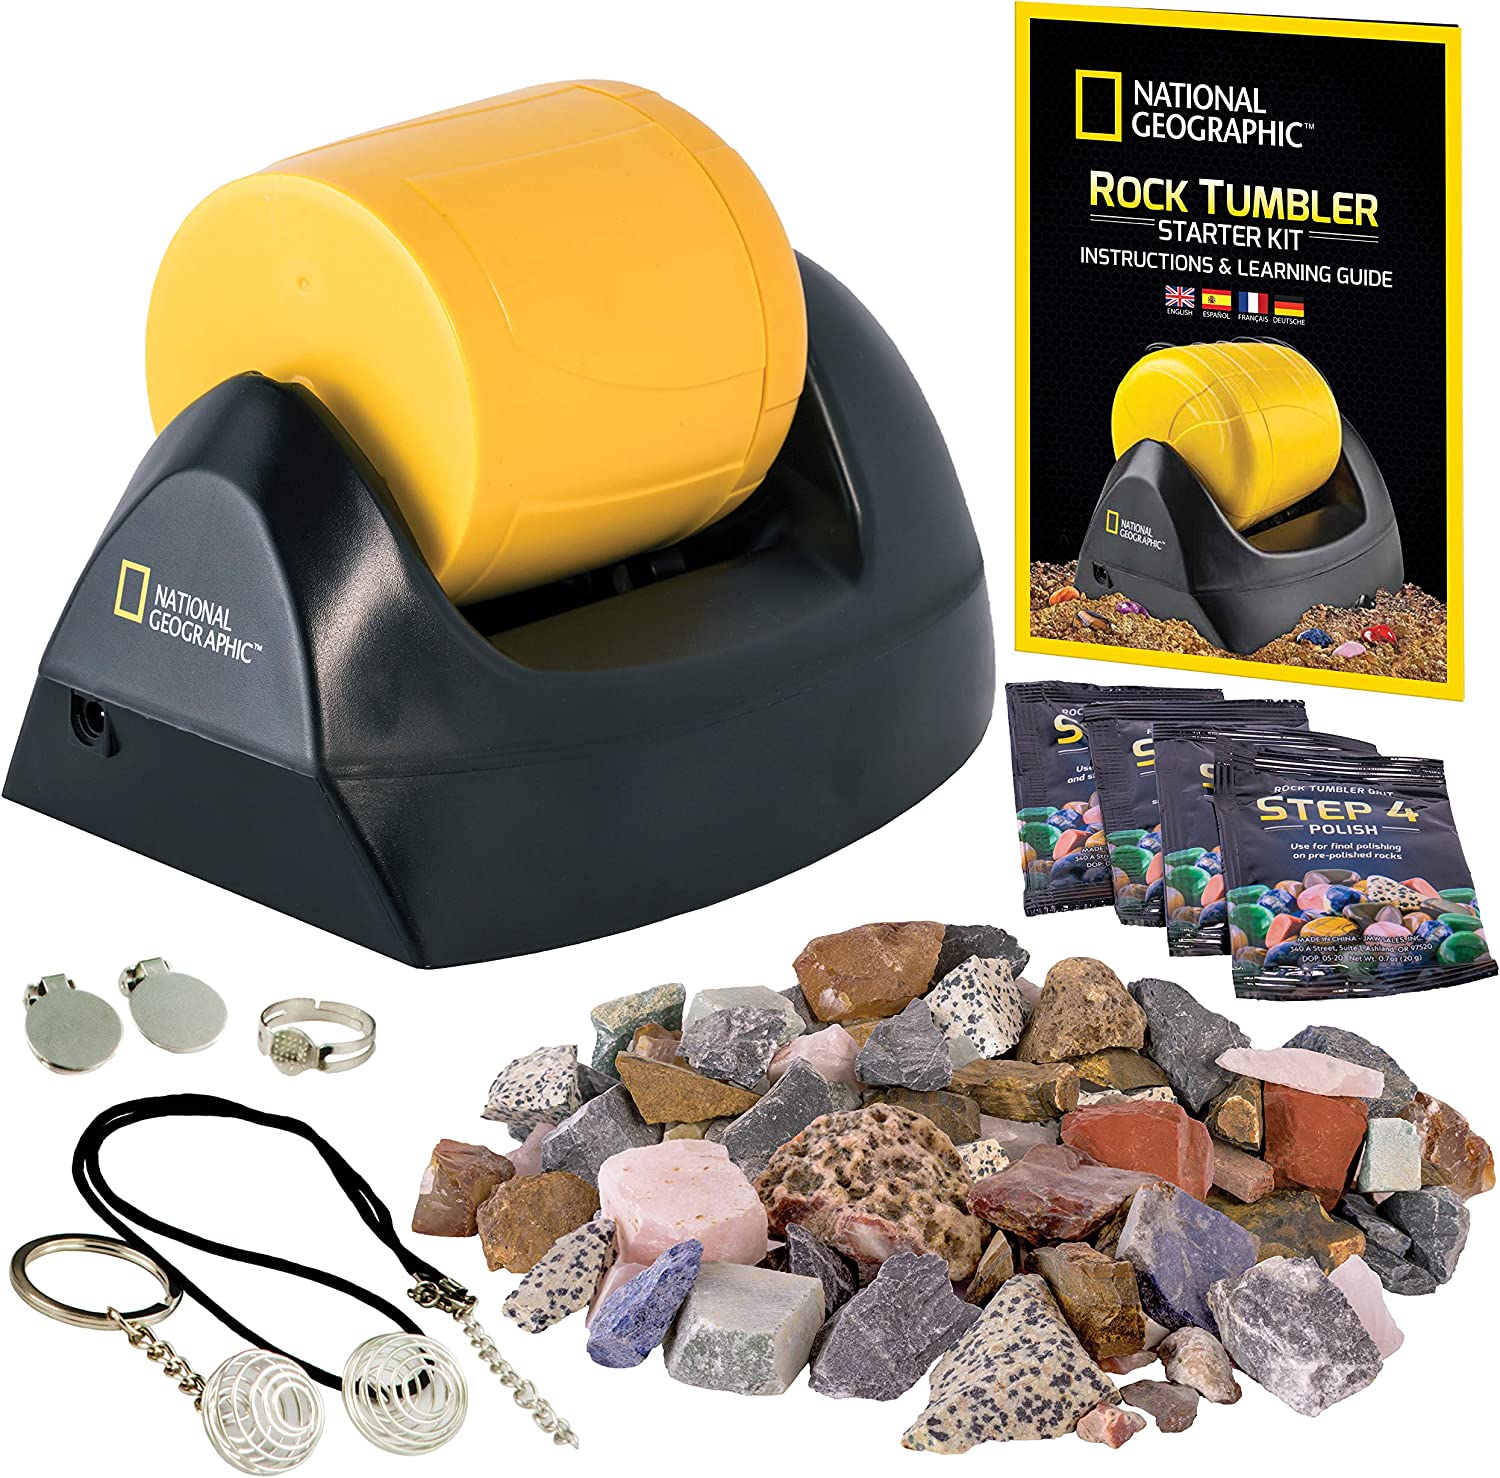 NATIONAL GEOGRAPHIC Starter Rock Tumbler Kit for Kids & Adults